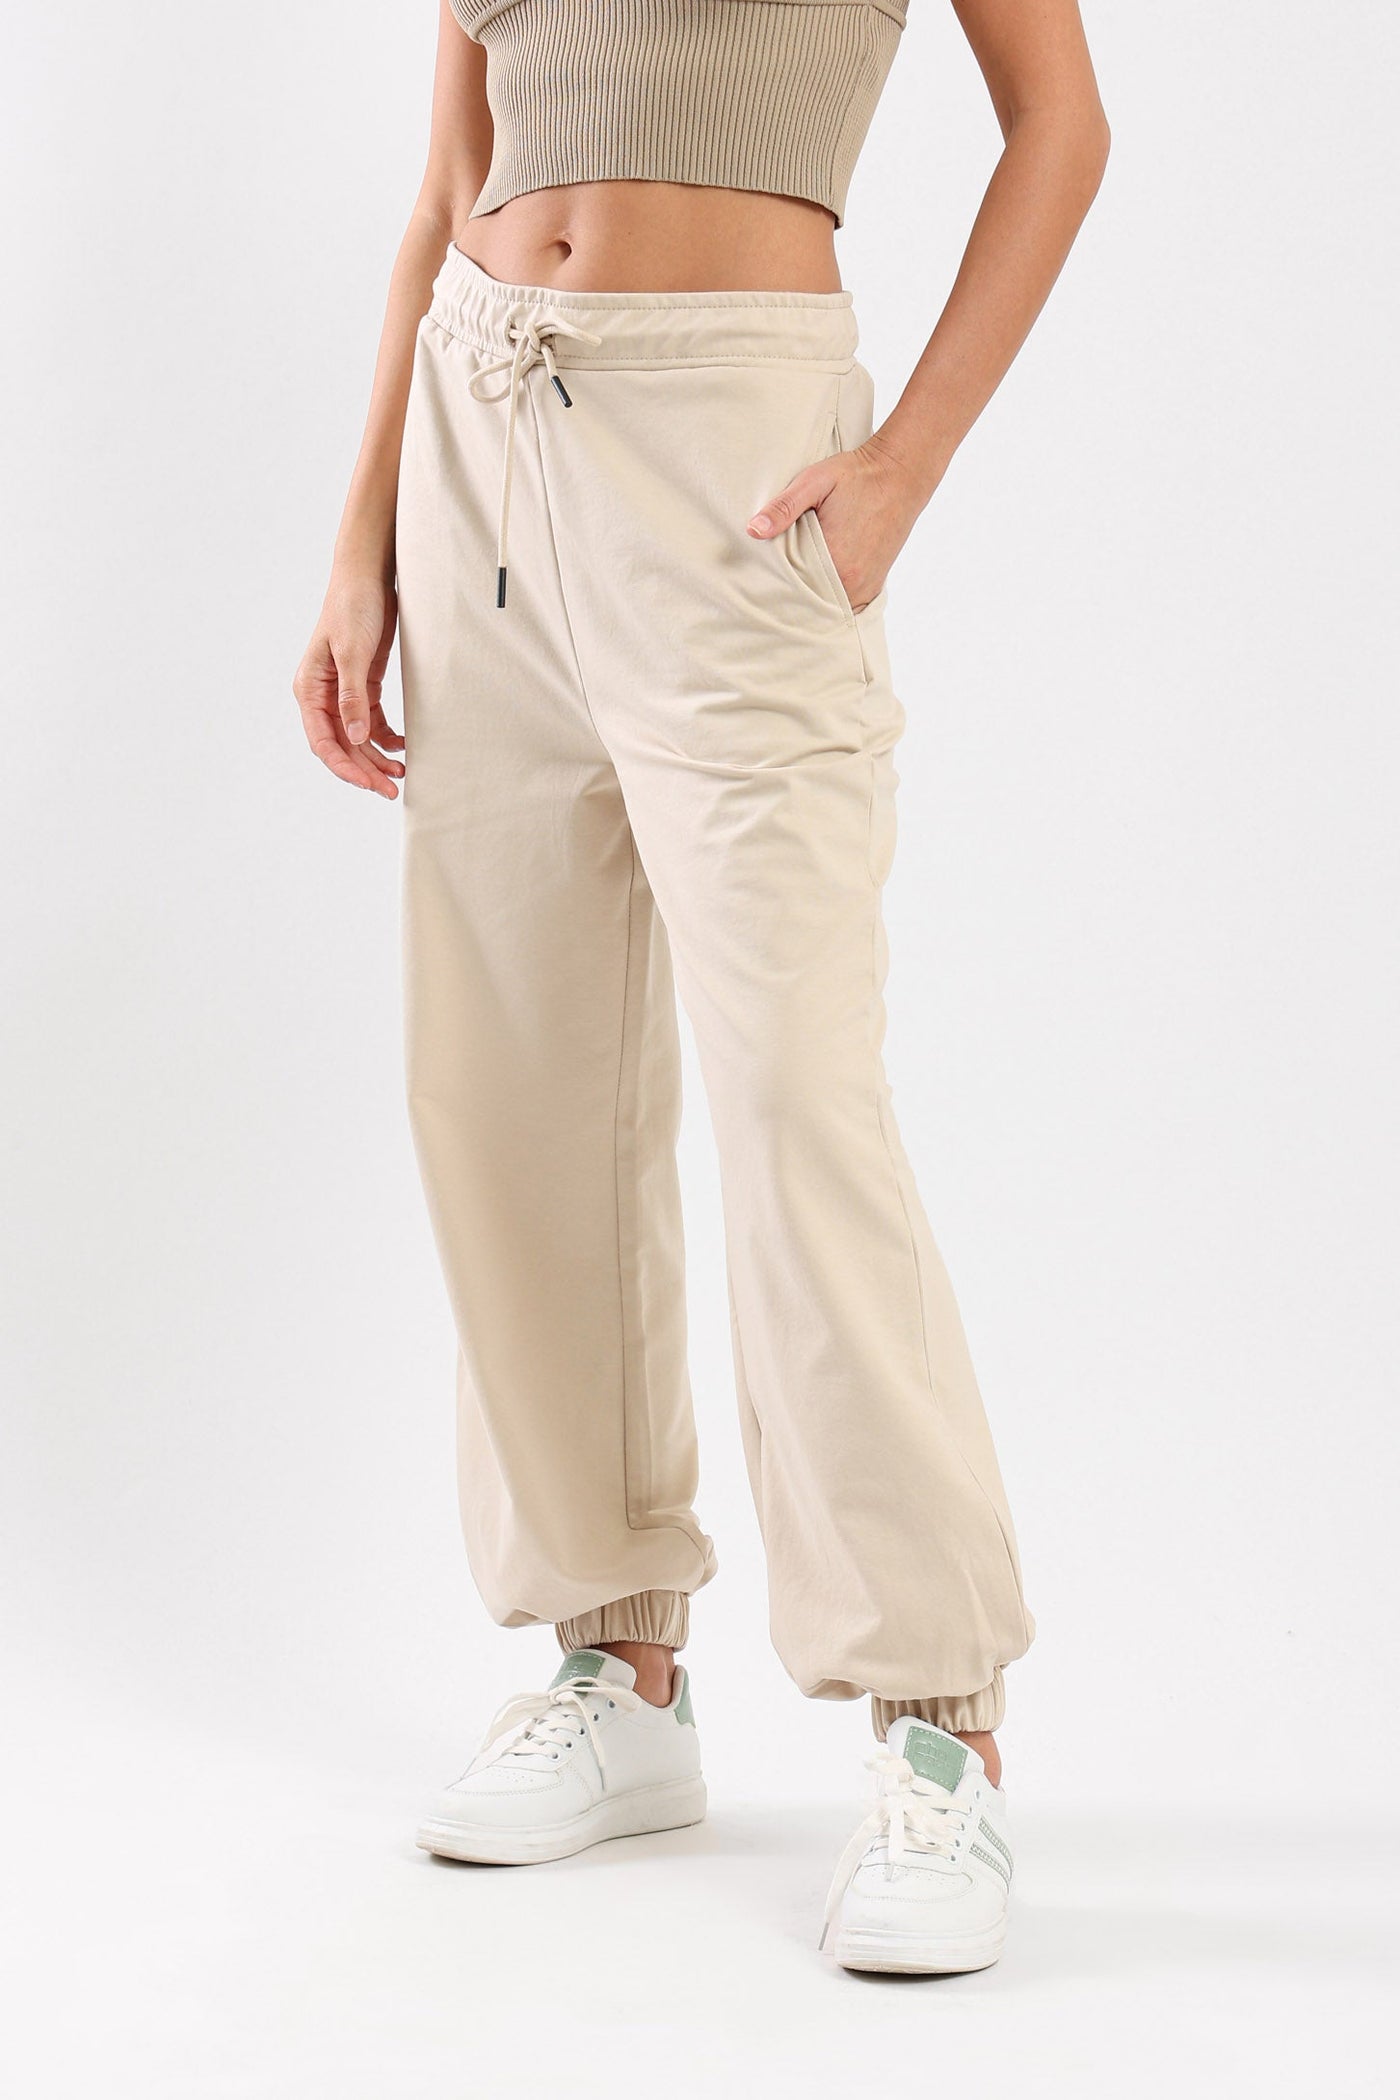 ALL DAY COMFORT JOGGERS - BEIGE